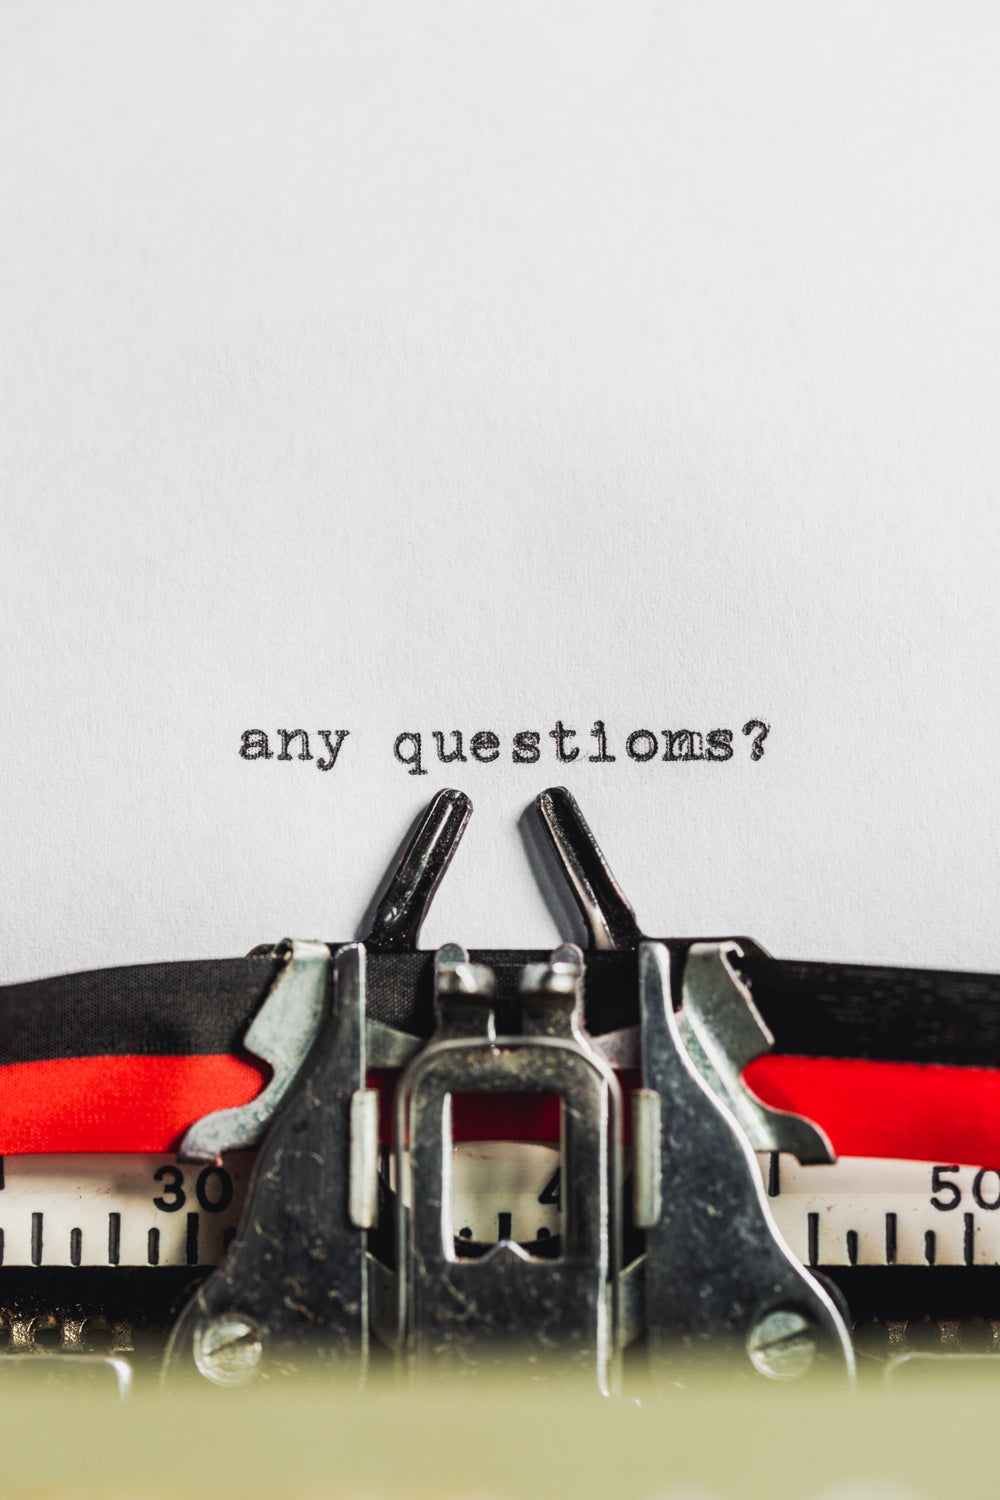 text on typewriter asks 'any questions?'